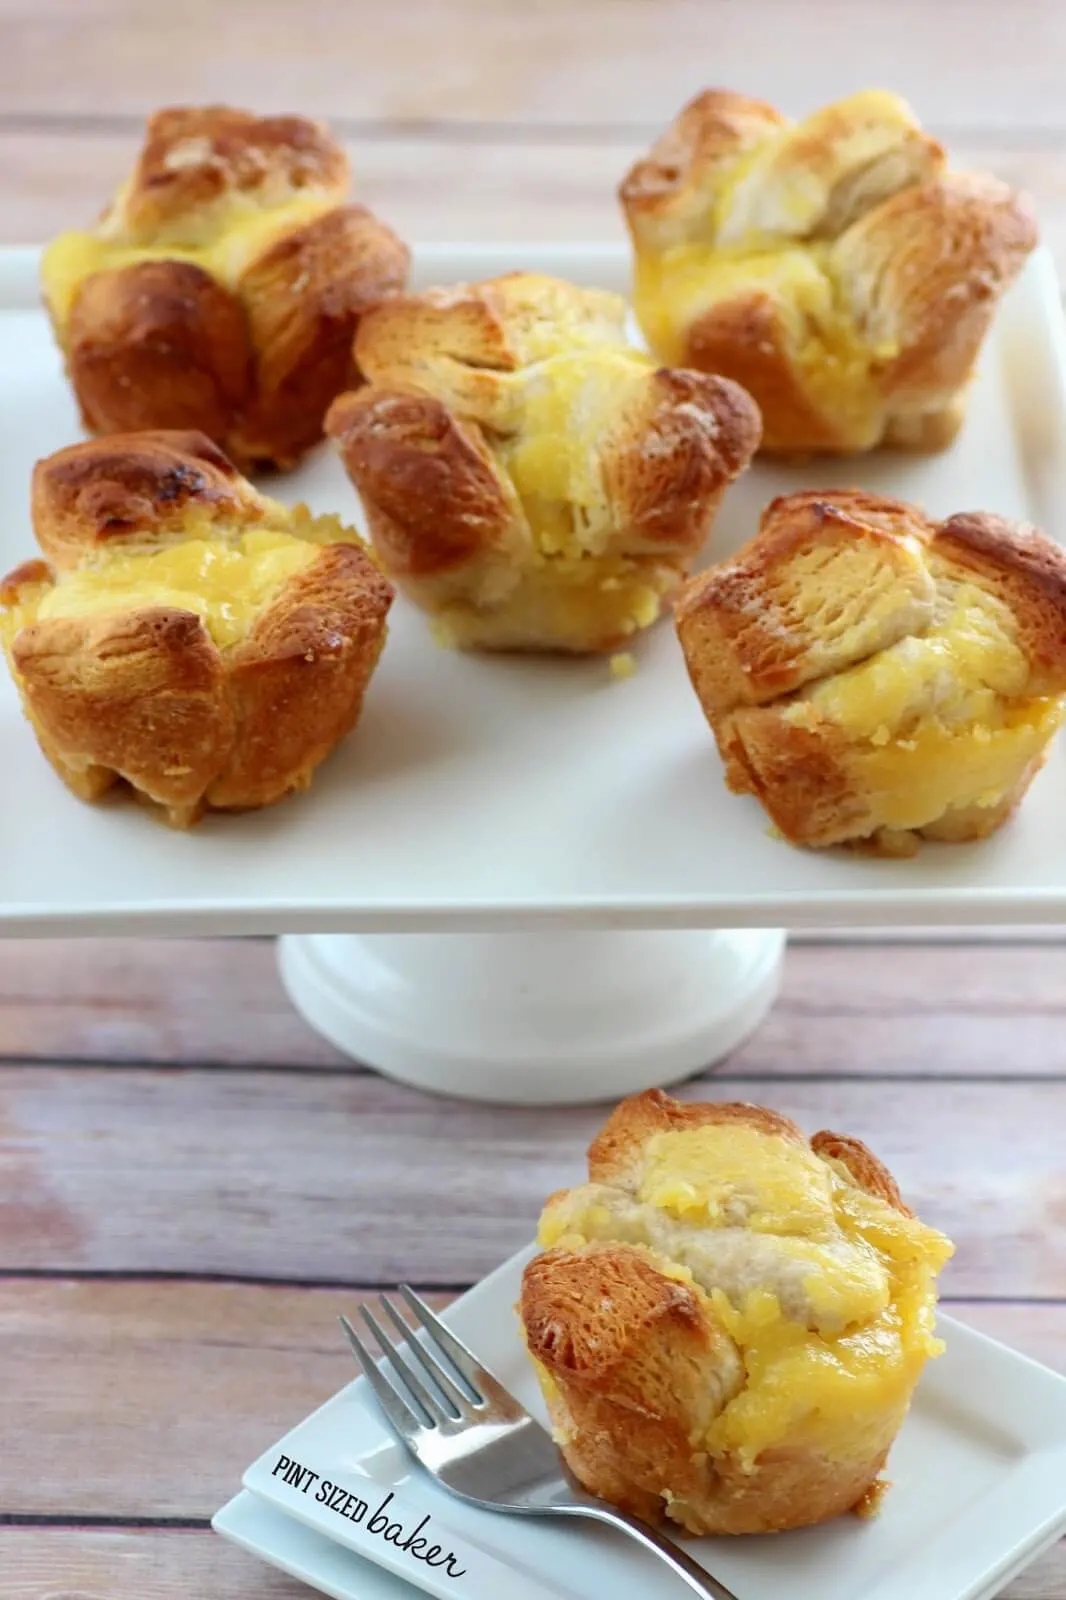 Your family is going to love this easy Lemon Curd Monkey Bread for breakfast and dessert. It's easy to make with just four store bought ingredients. Make some for a weekend treat!